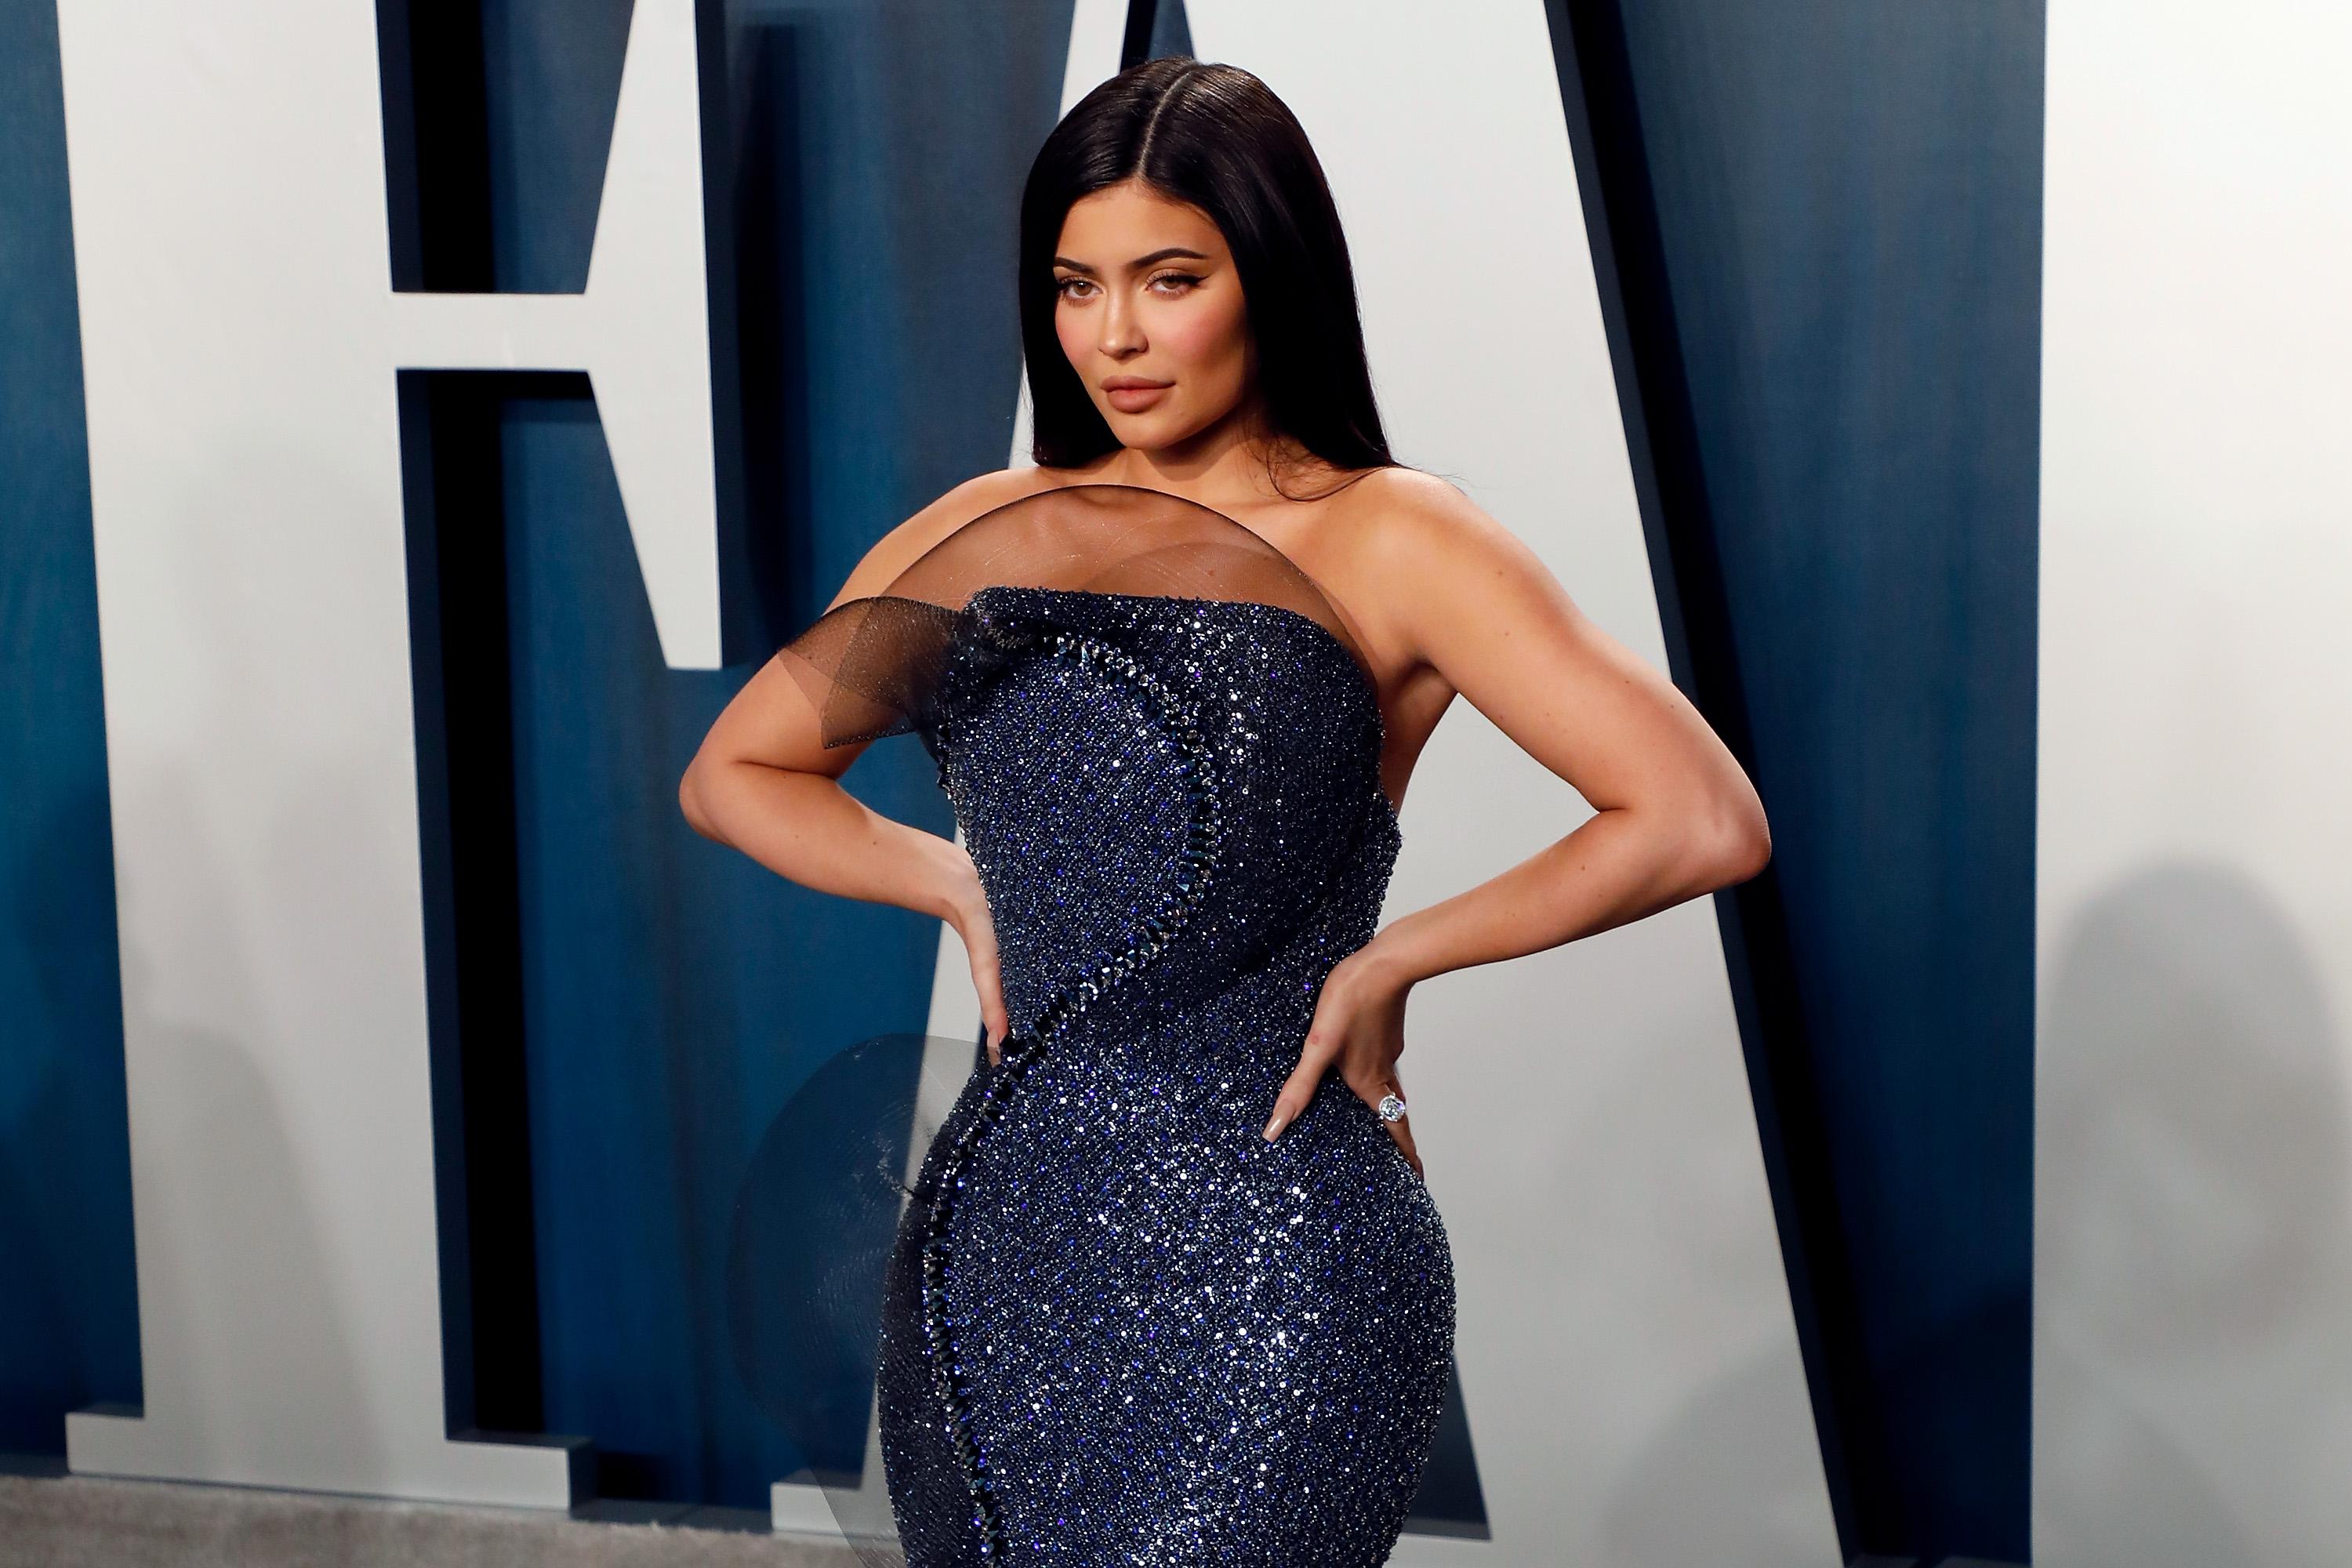 Kylie Jenner Lives a Luxurious Lifestyle: How Much is She Donating to Charity?